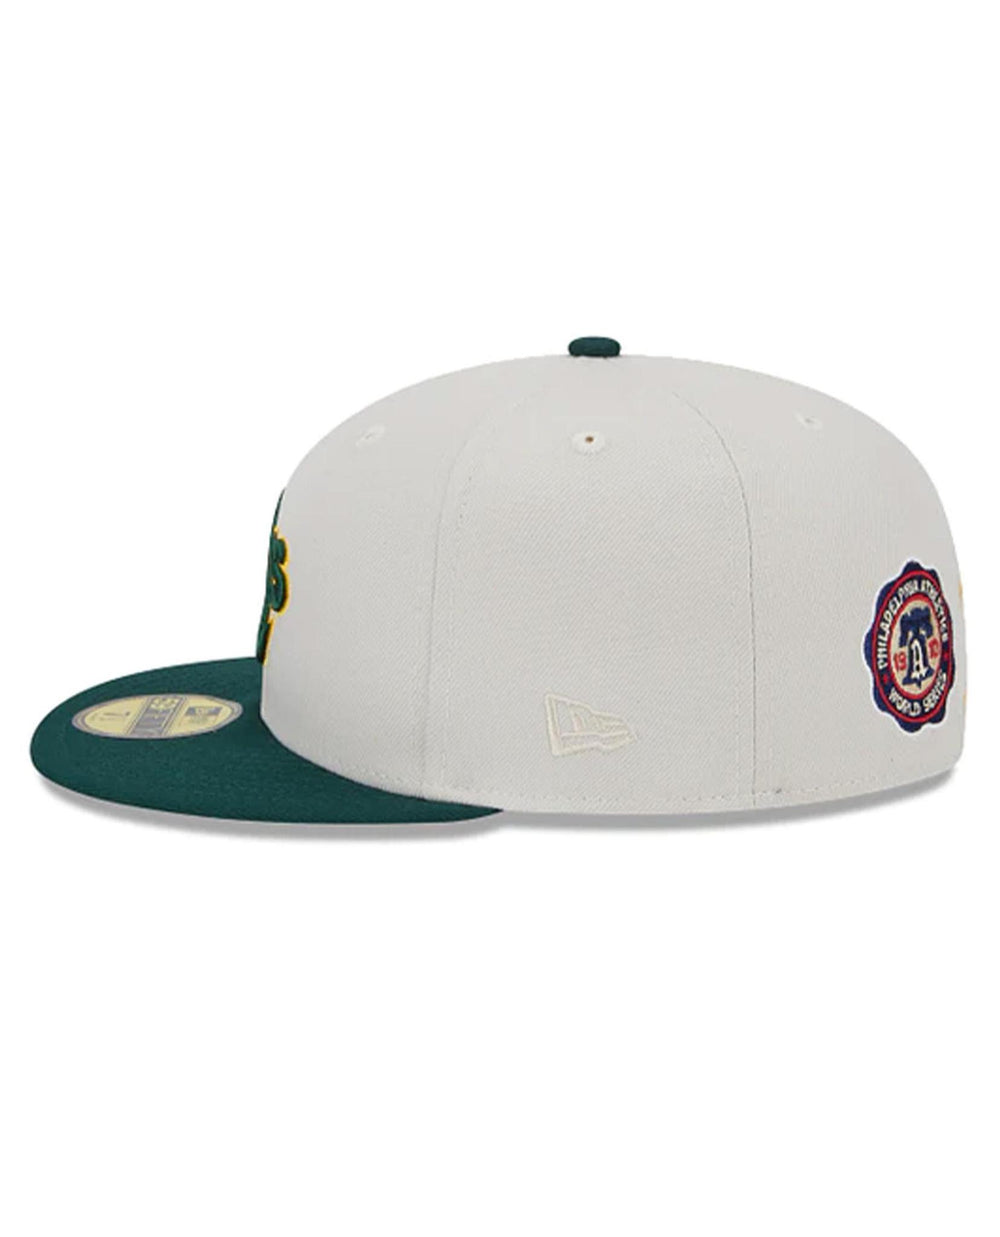 Oakland Athletics Cooperstown 59FIFTY Black/White Fitted - New Era cap